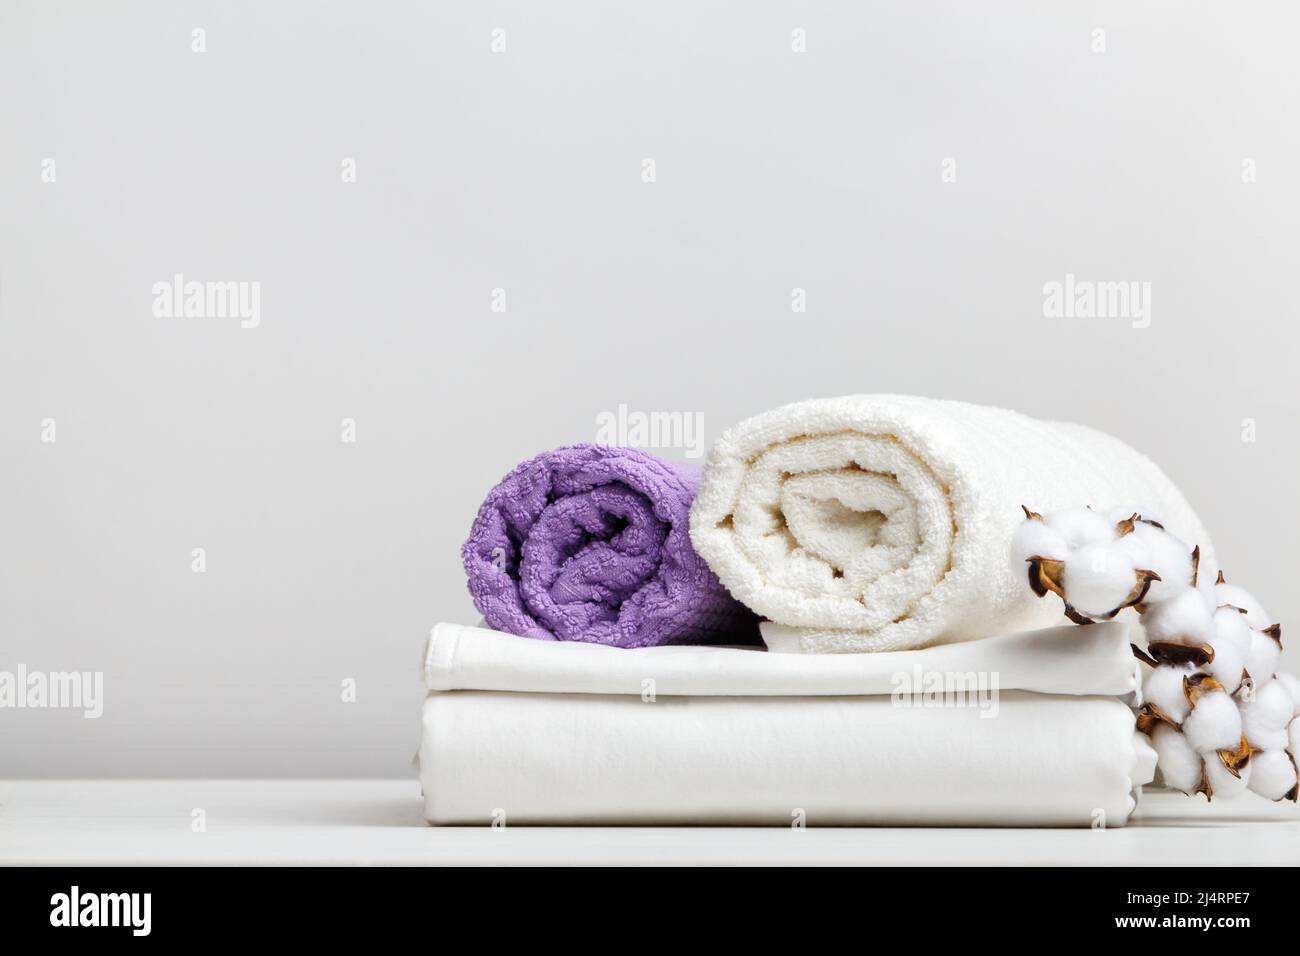 White bed linen, sheets and terry towels with a cotton branch on a light gray table Stock Photo